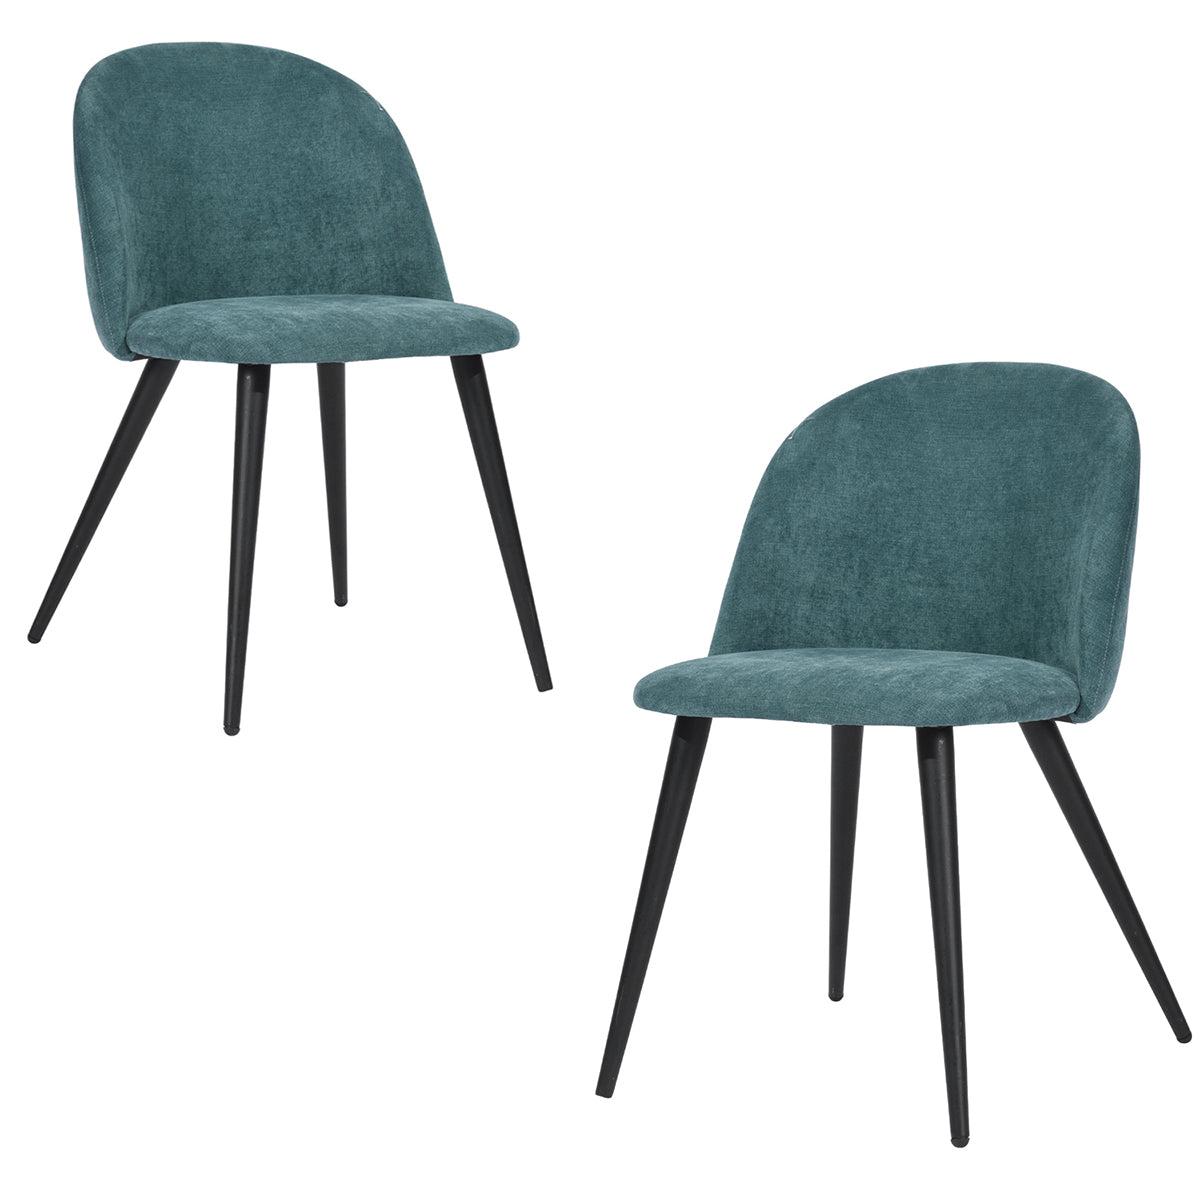 Upholstered Arm Chair/Dining Chairs set of 2